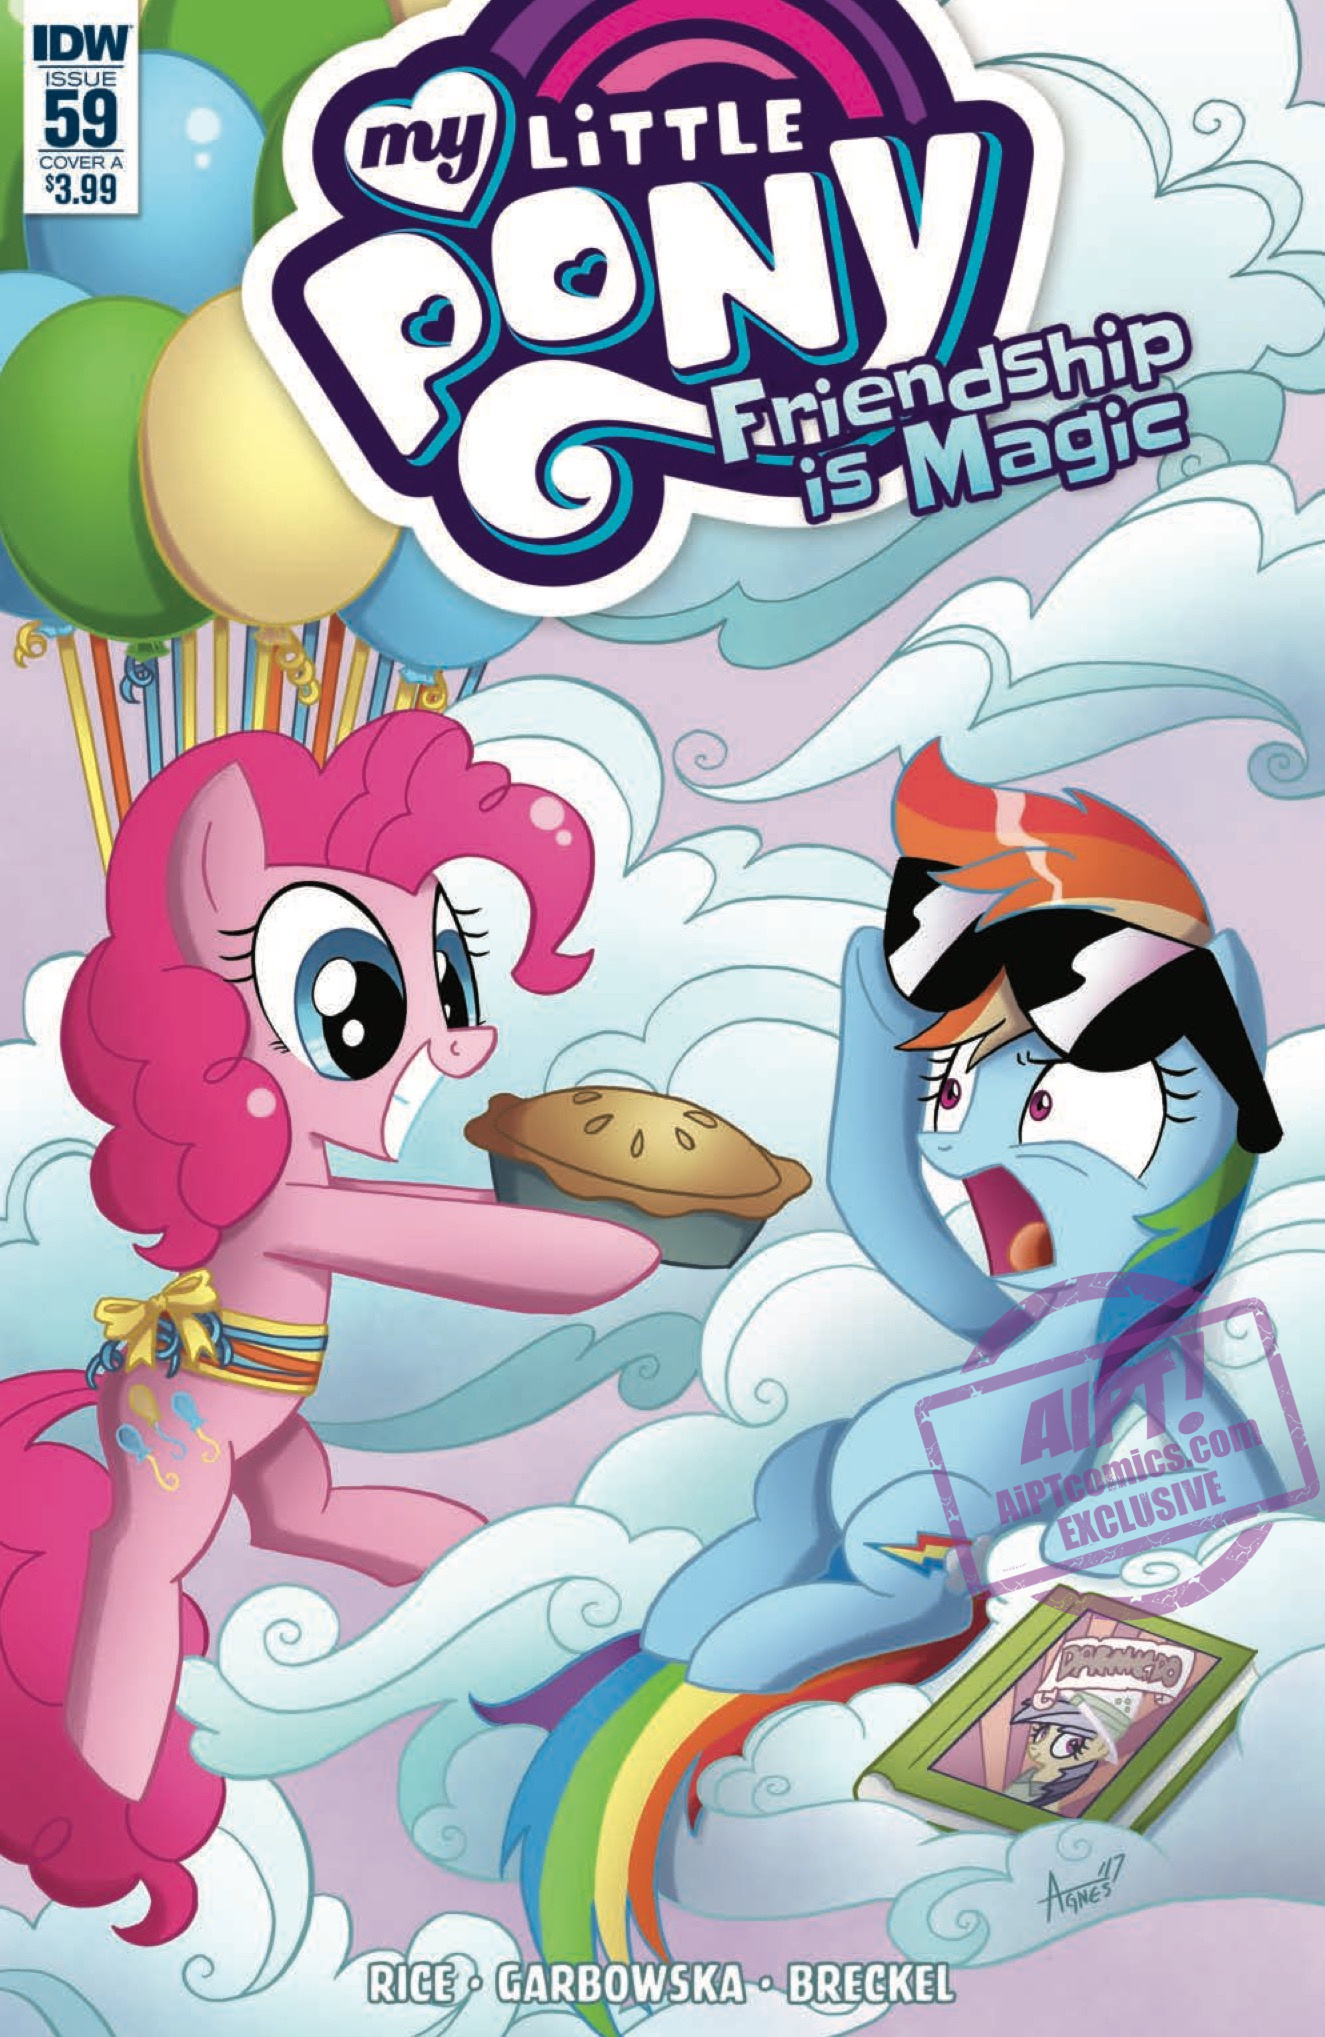 [EXCLUSIVE] IDW Preview: My Little Pony: Friendship is Magic #59